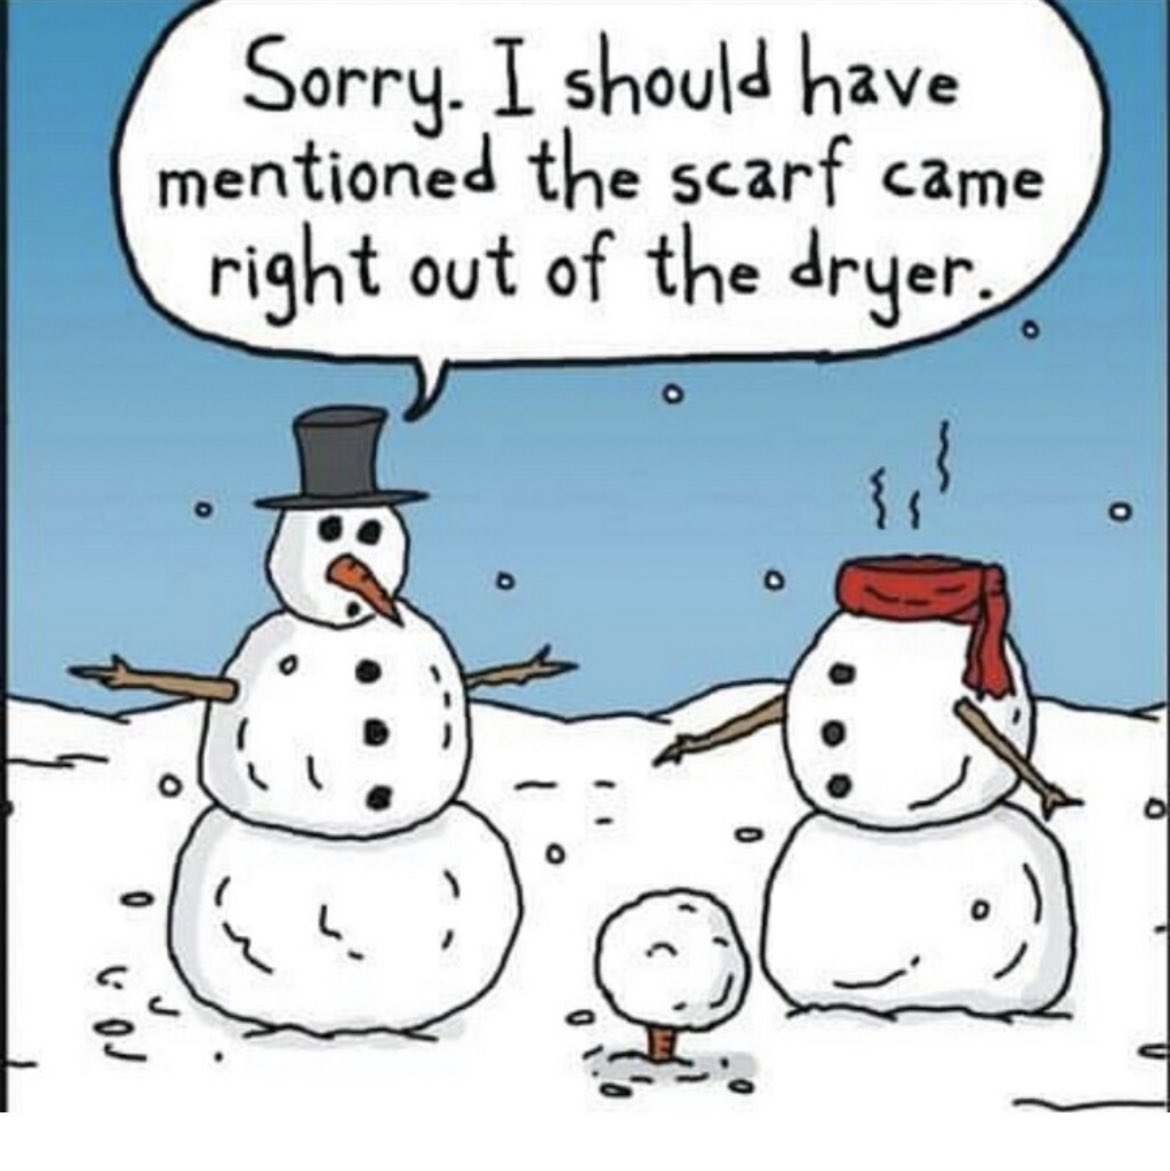 Your Friday funny… a little holiday humor!  🤣 ⛄️🤣⛄️🤣⛄️🤣⛄️

#fridayvibes #fridayfunny #friday #fridayfeeling #fridaymood #fridaymotivation #holidayhumor #theweekend